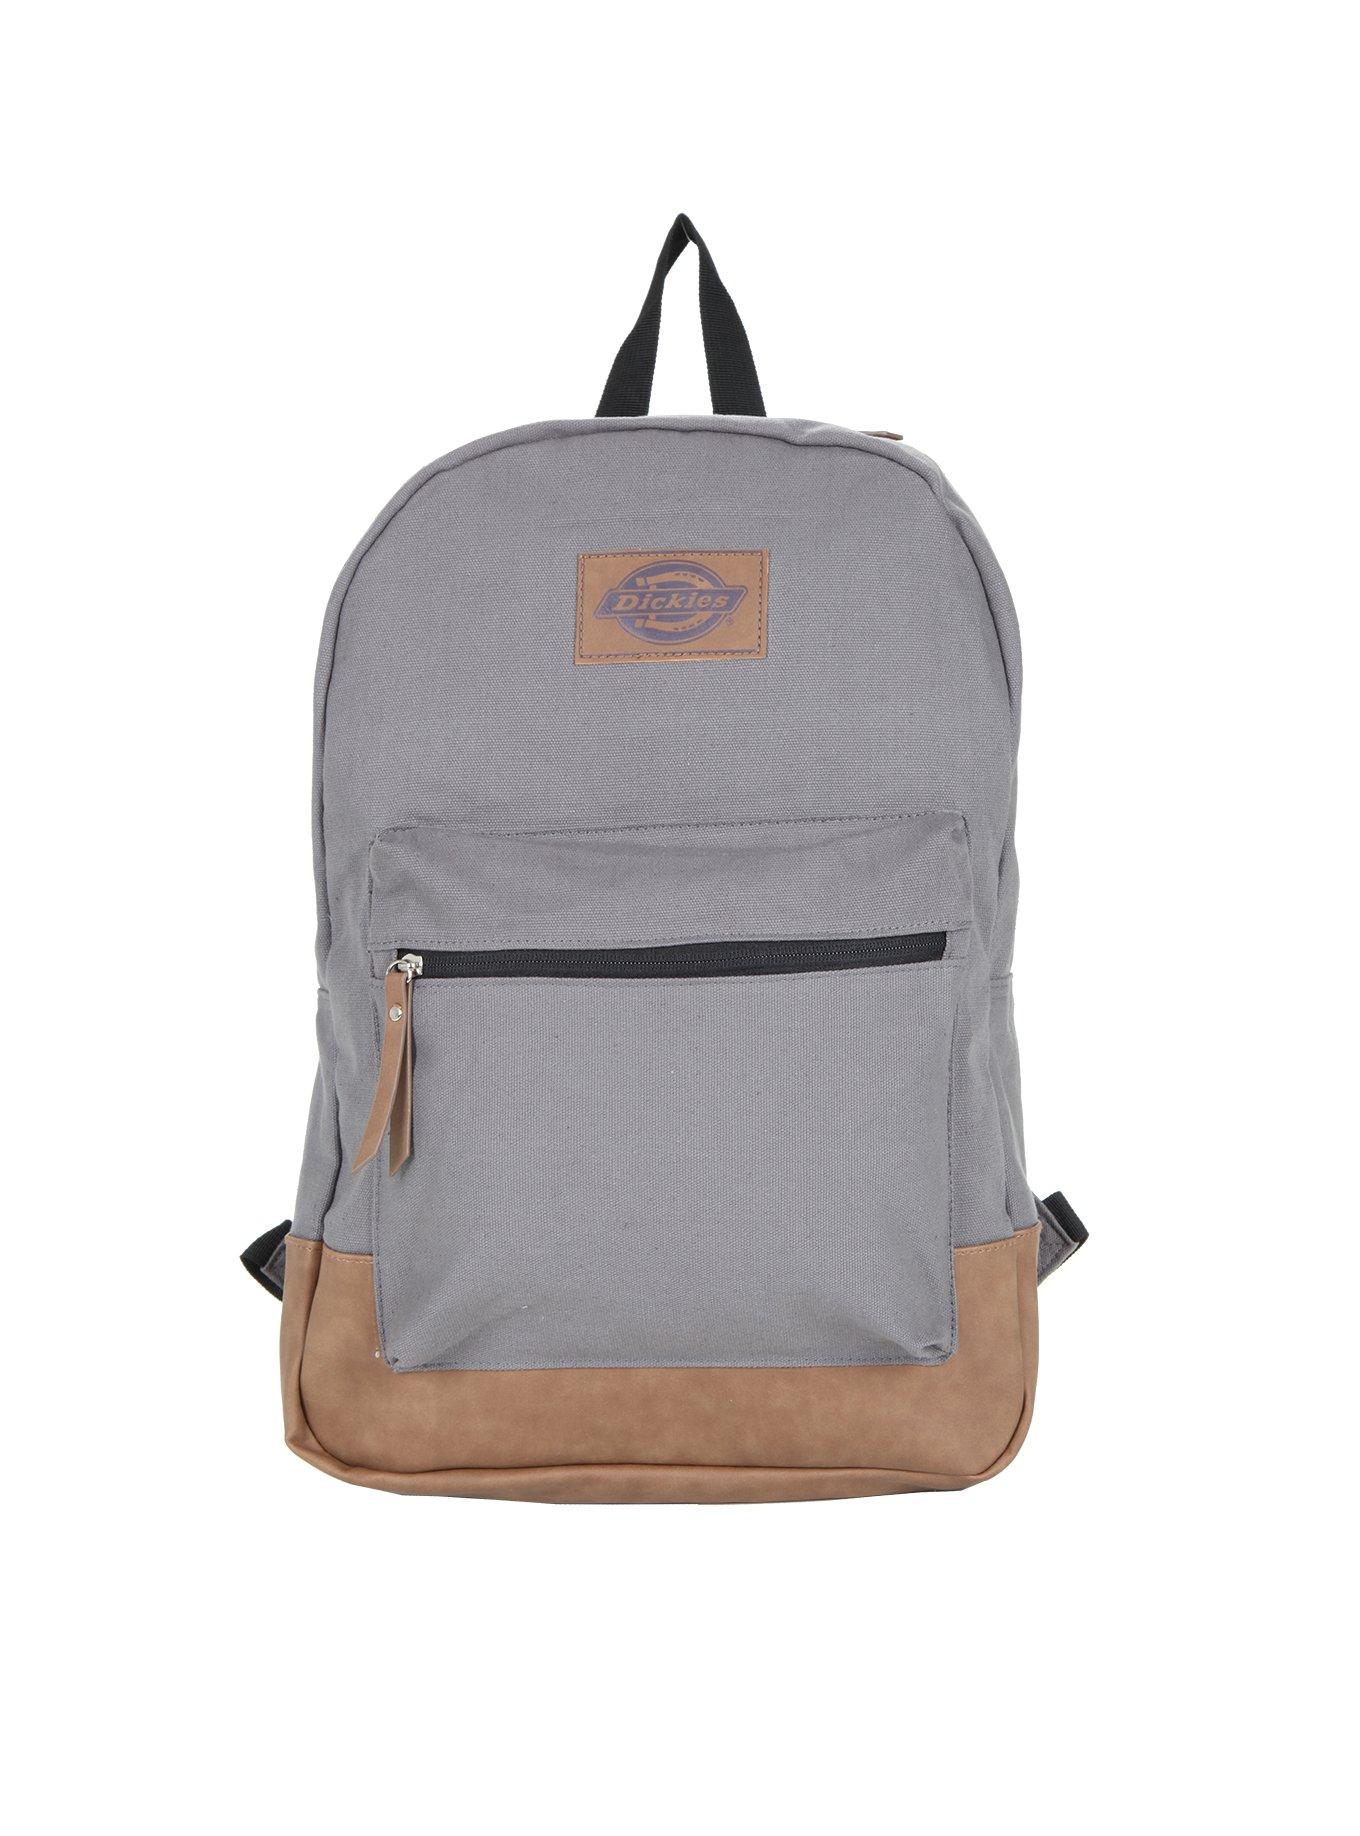 Dickies Grey Faux Leather Bottom Backpack, , hi-res